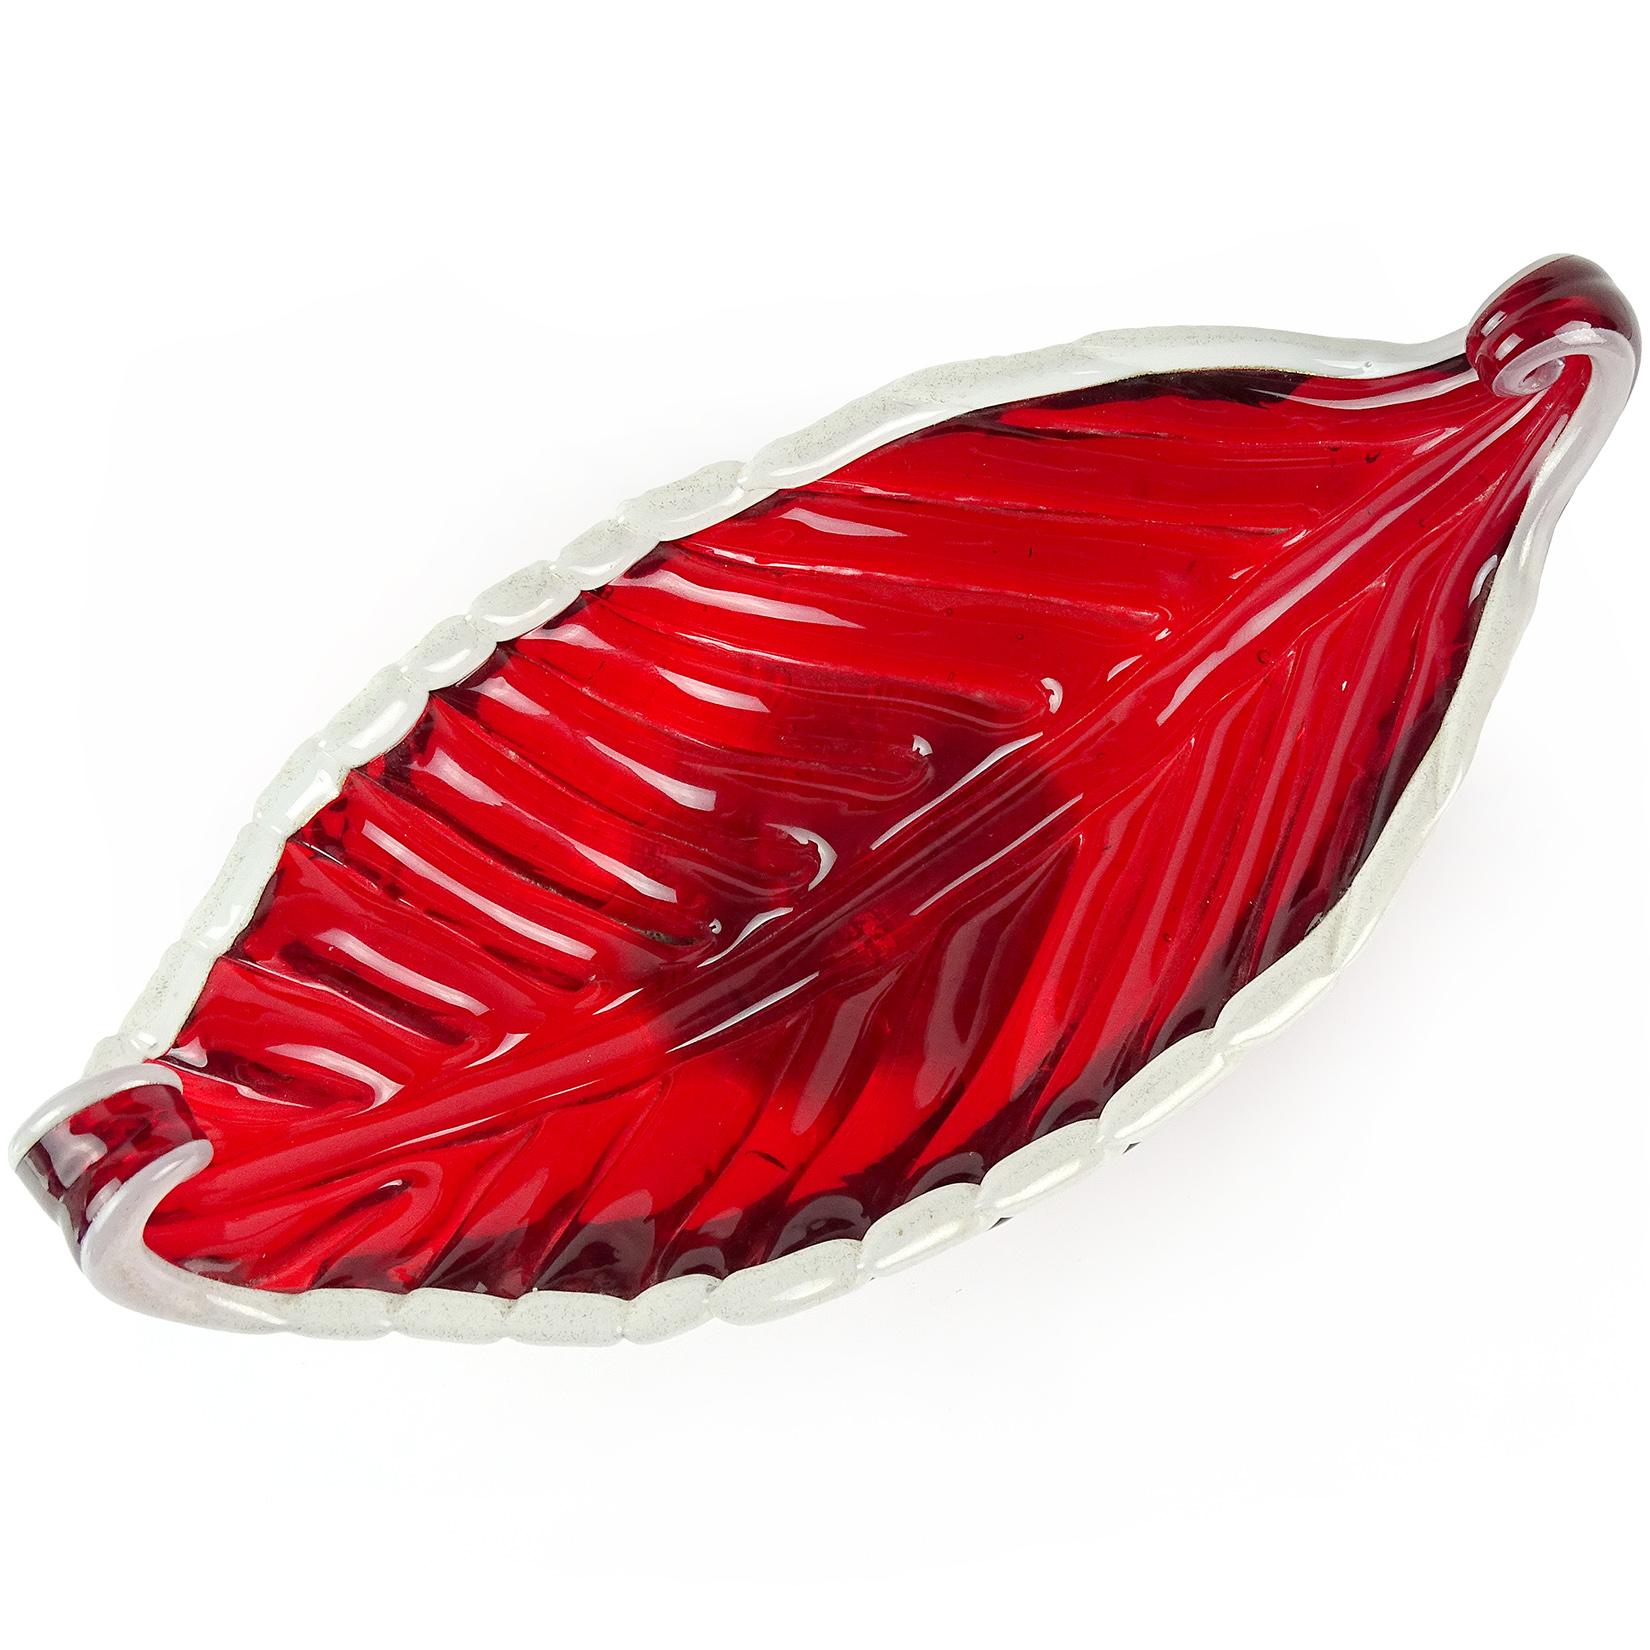 Beautiful Murano hand blown red and gold flecks Italian art glass Venetian gondola shape bowl, catch all. Documented to the Barovier e Toso company. The piece has a white lined edge and applied white disk with gold leaf. Measures 8 3/4